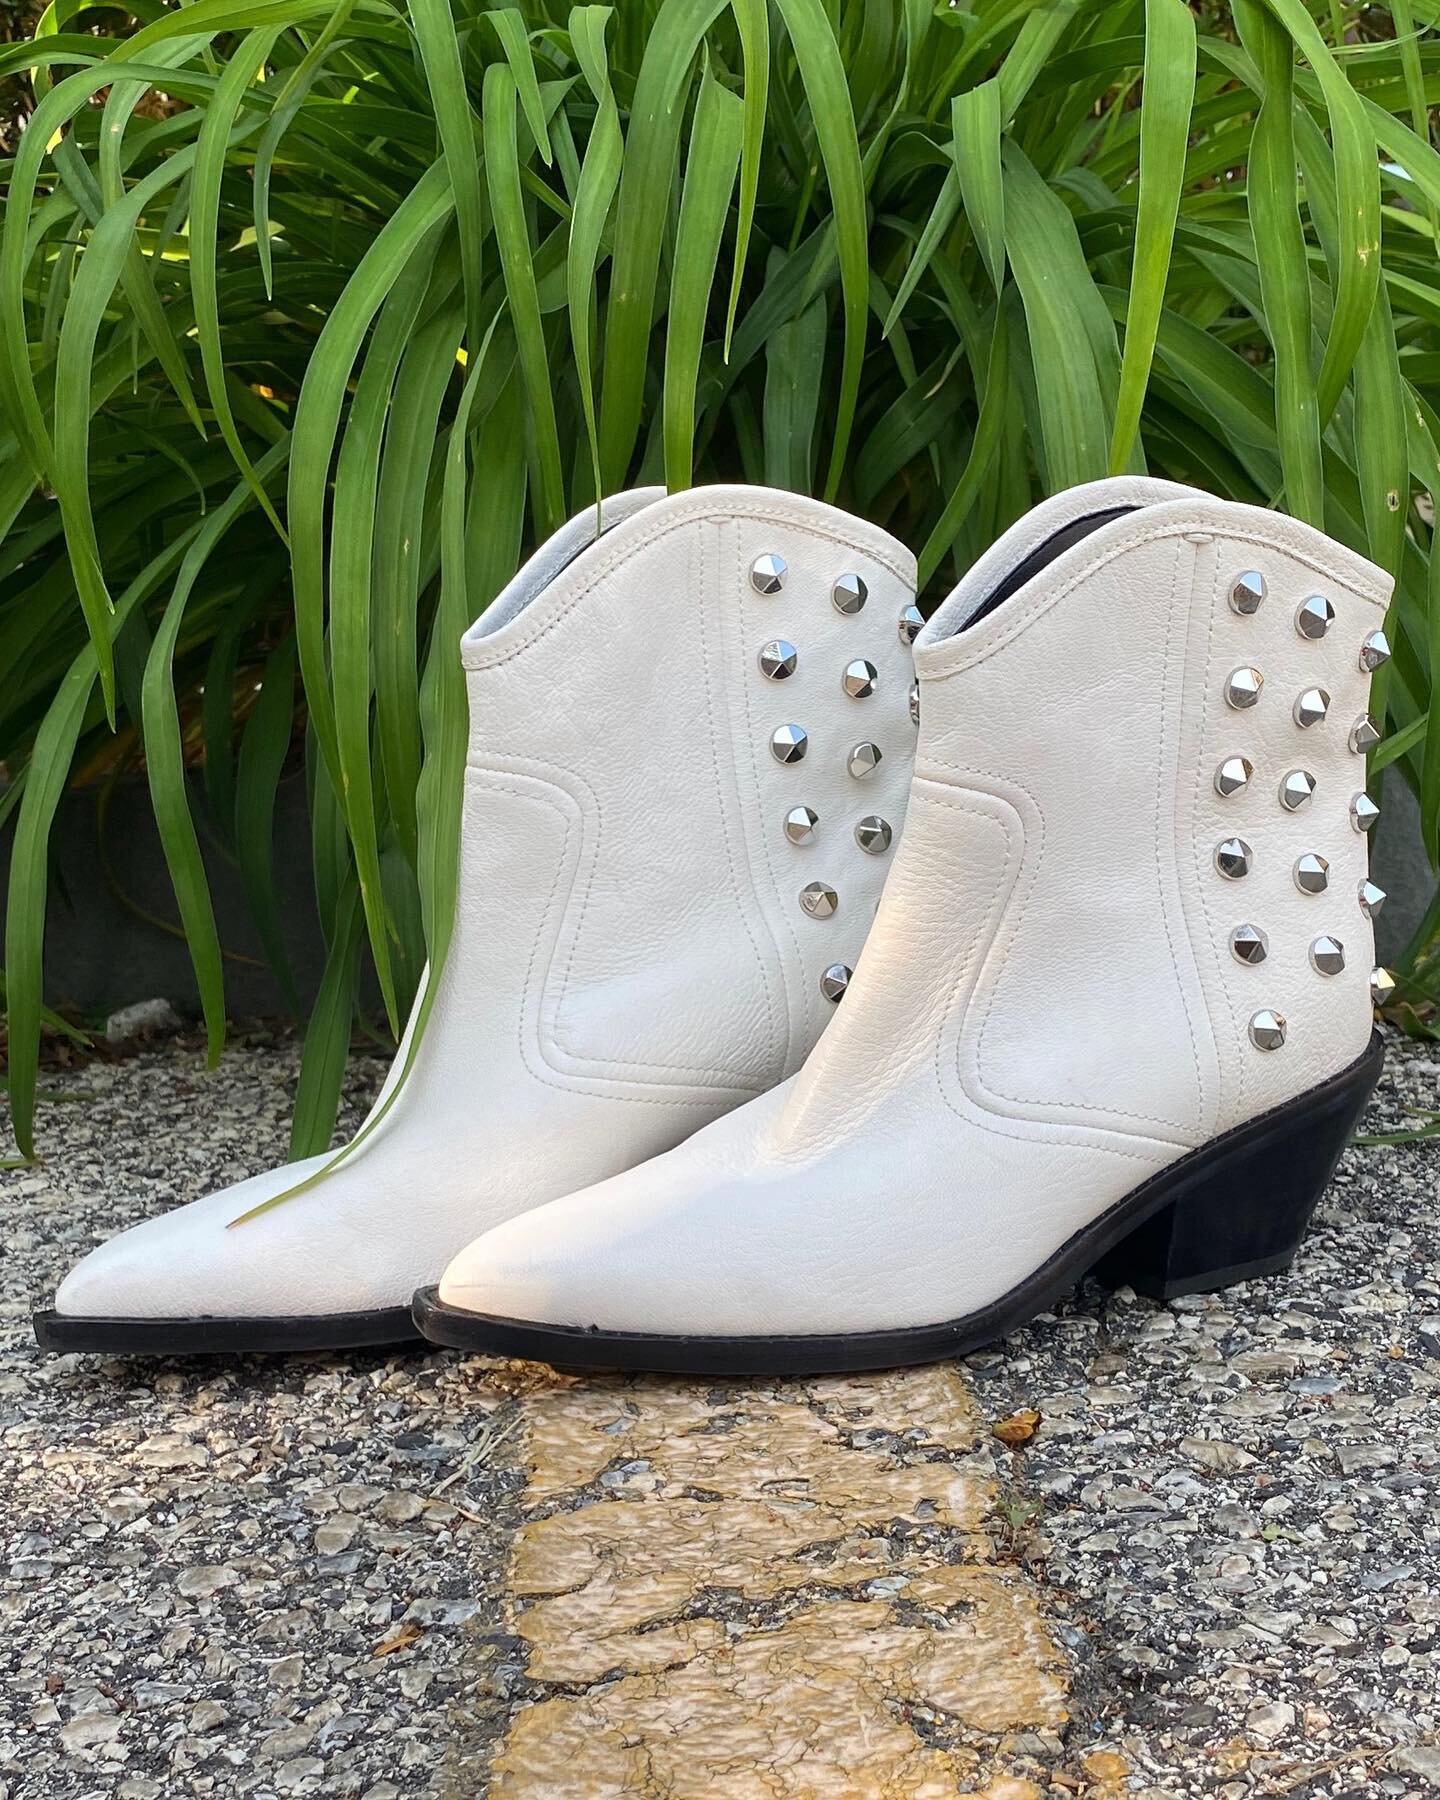 Make these Marc Fisher boots yours this summer!

Available for $68.95
Size: 7.5

For inquiries, please contact us at 267.331.6725 or by email chestnuthill@greenestreet.com